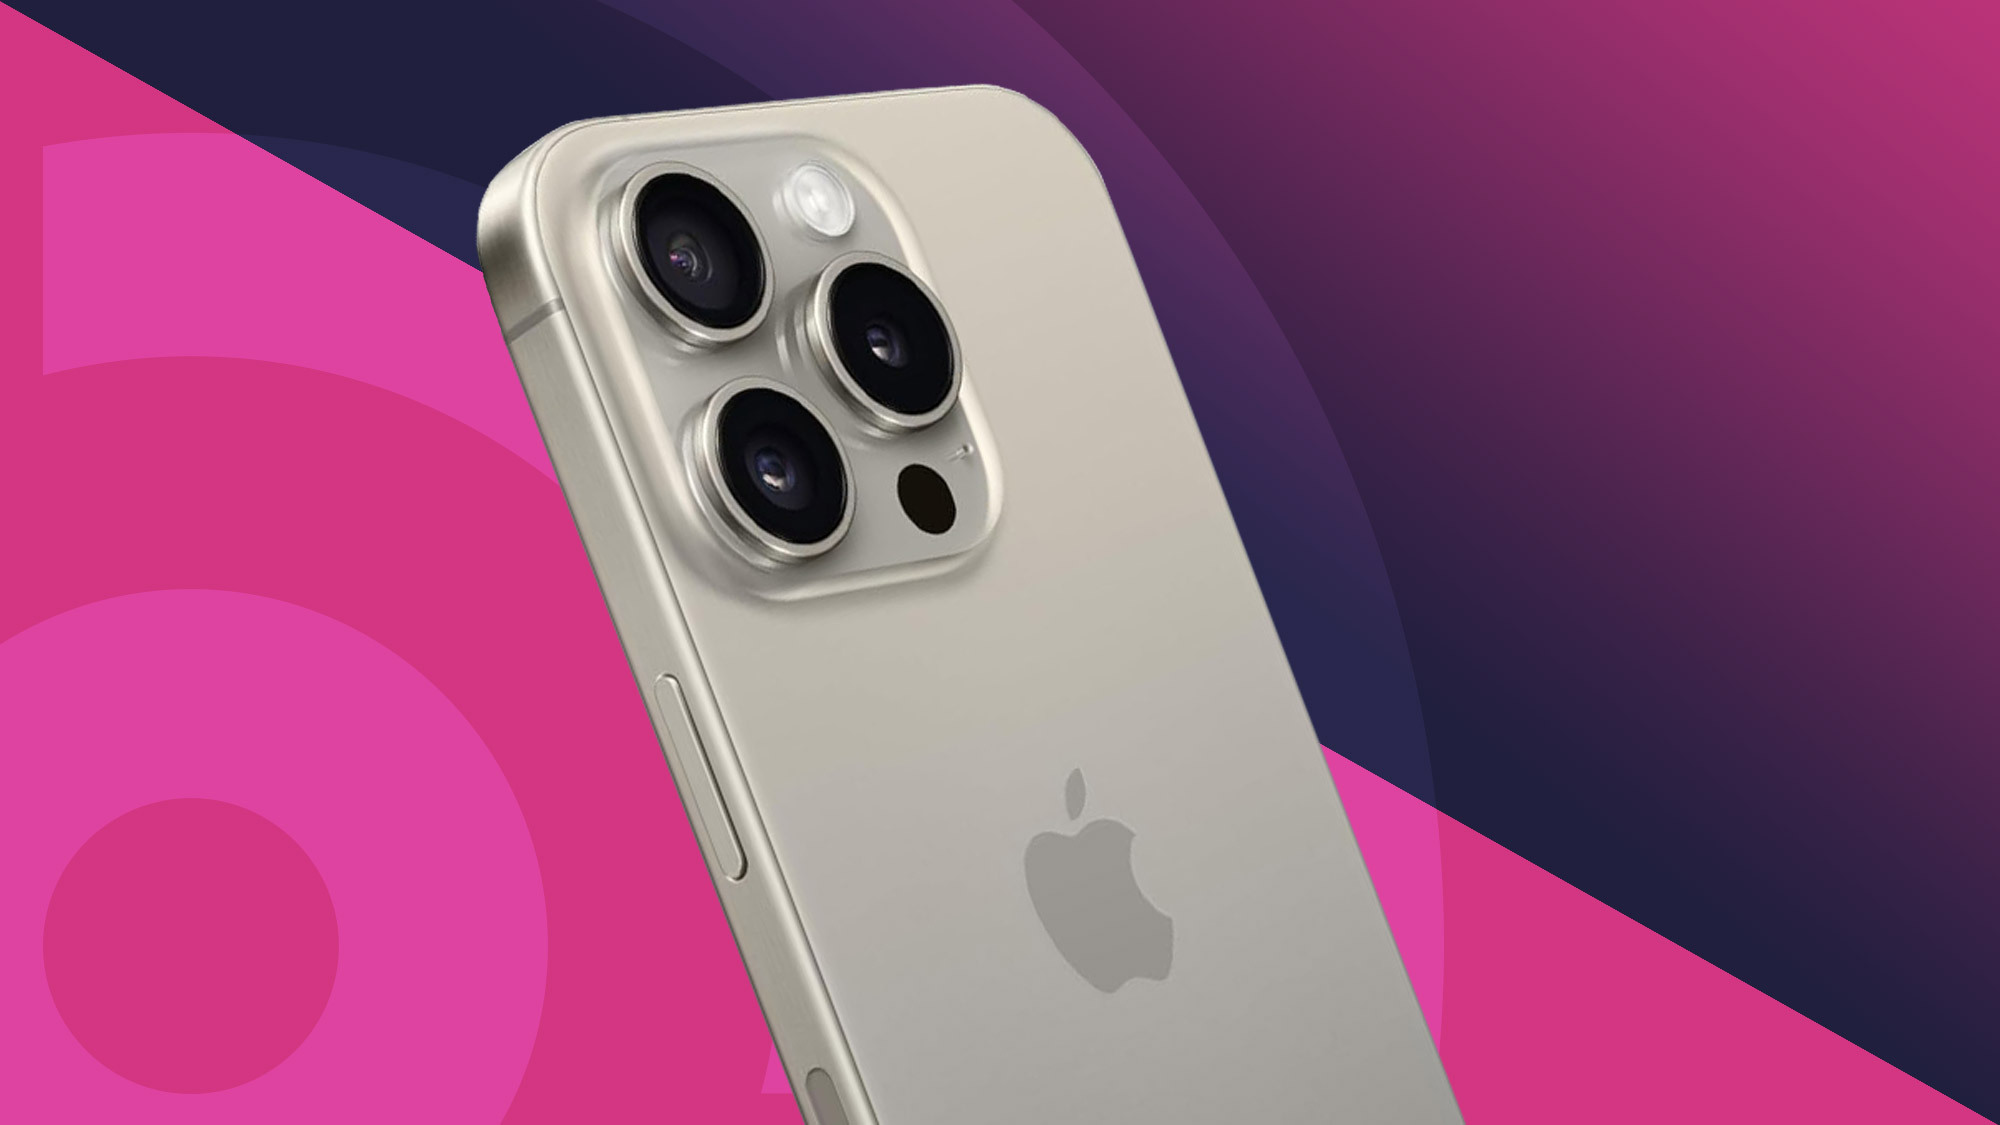 Top 15 Live Streaming Apps for iPhone in 2023